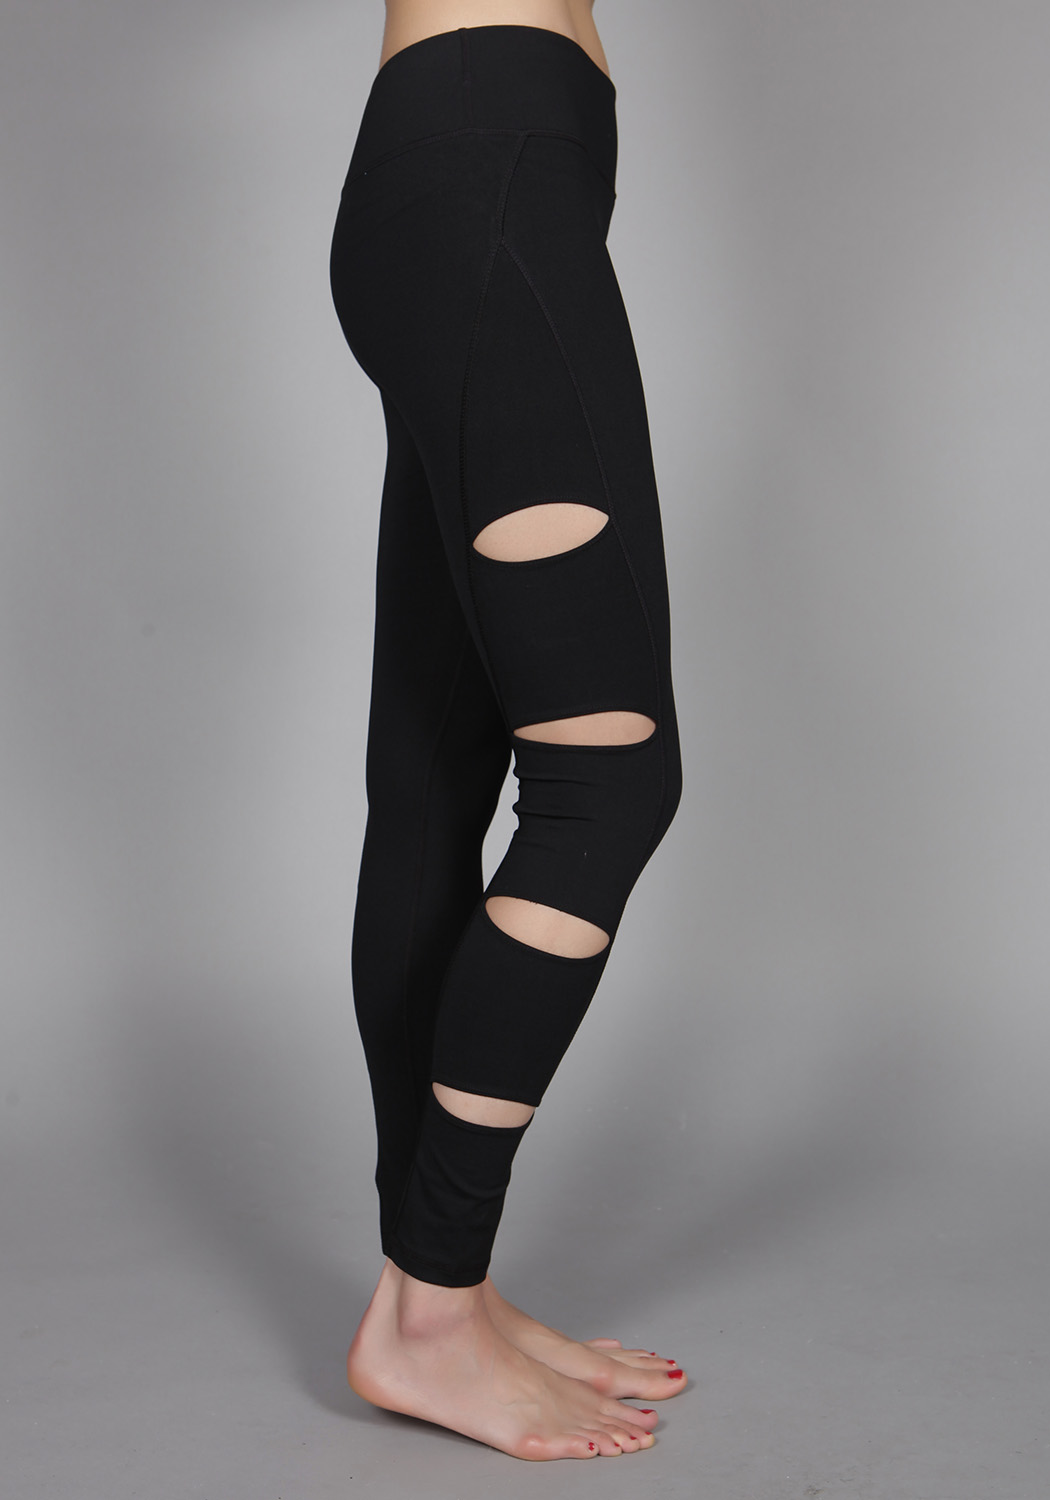  Leggings With Holes